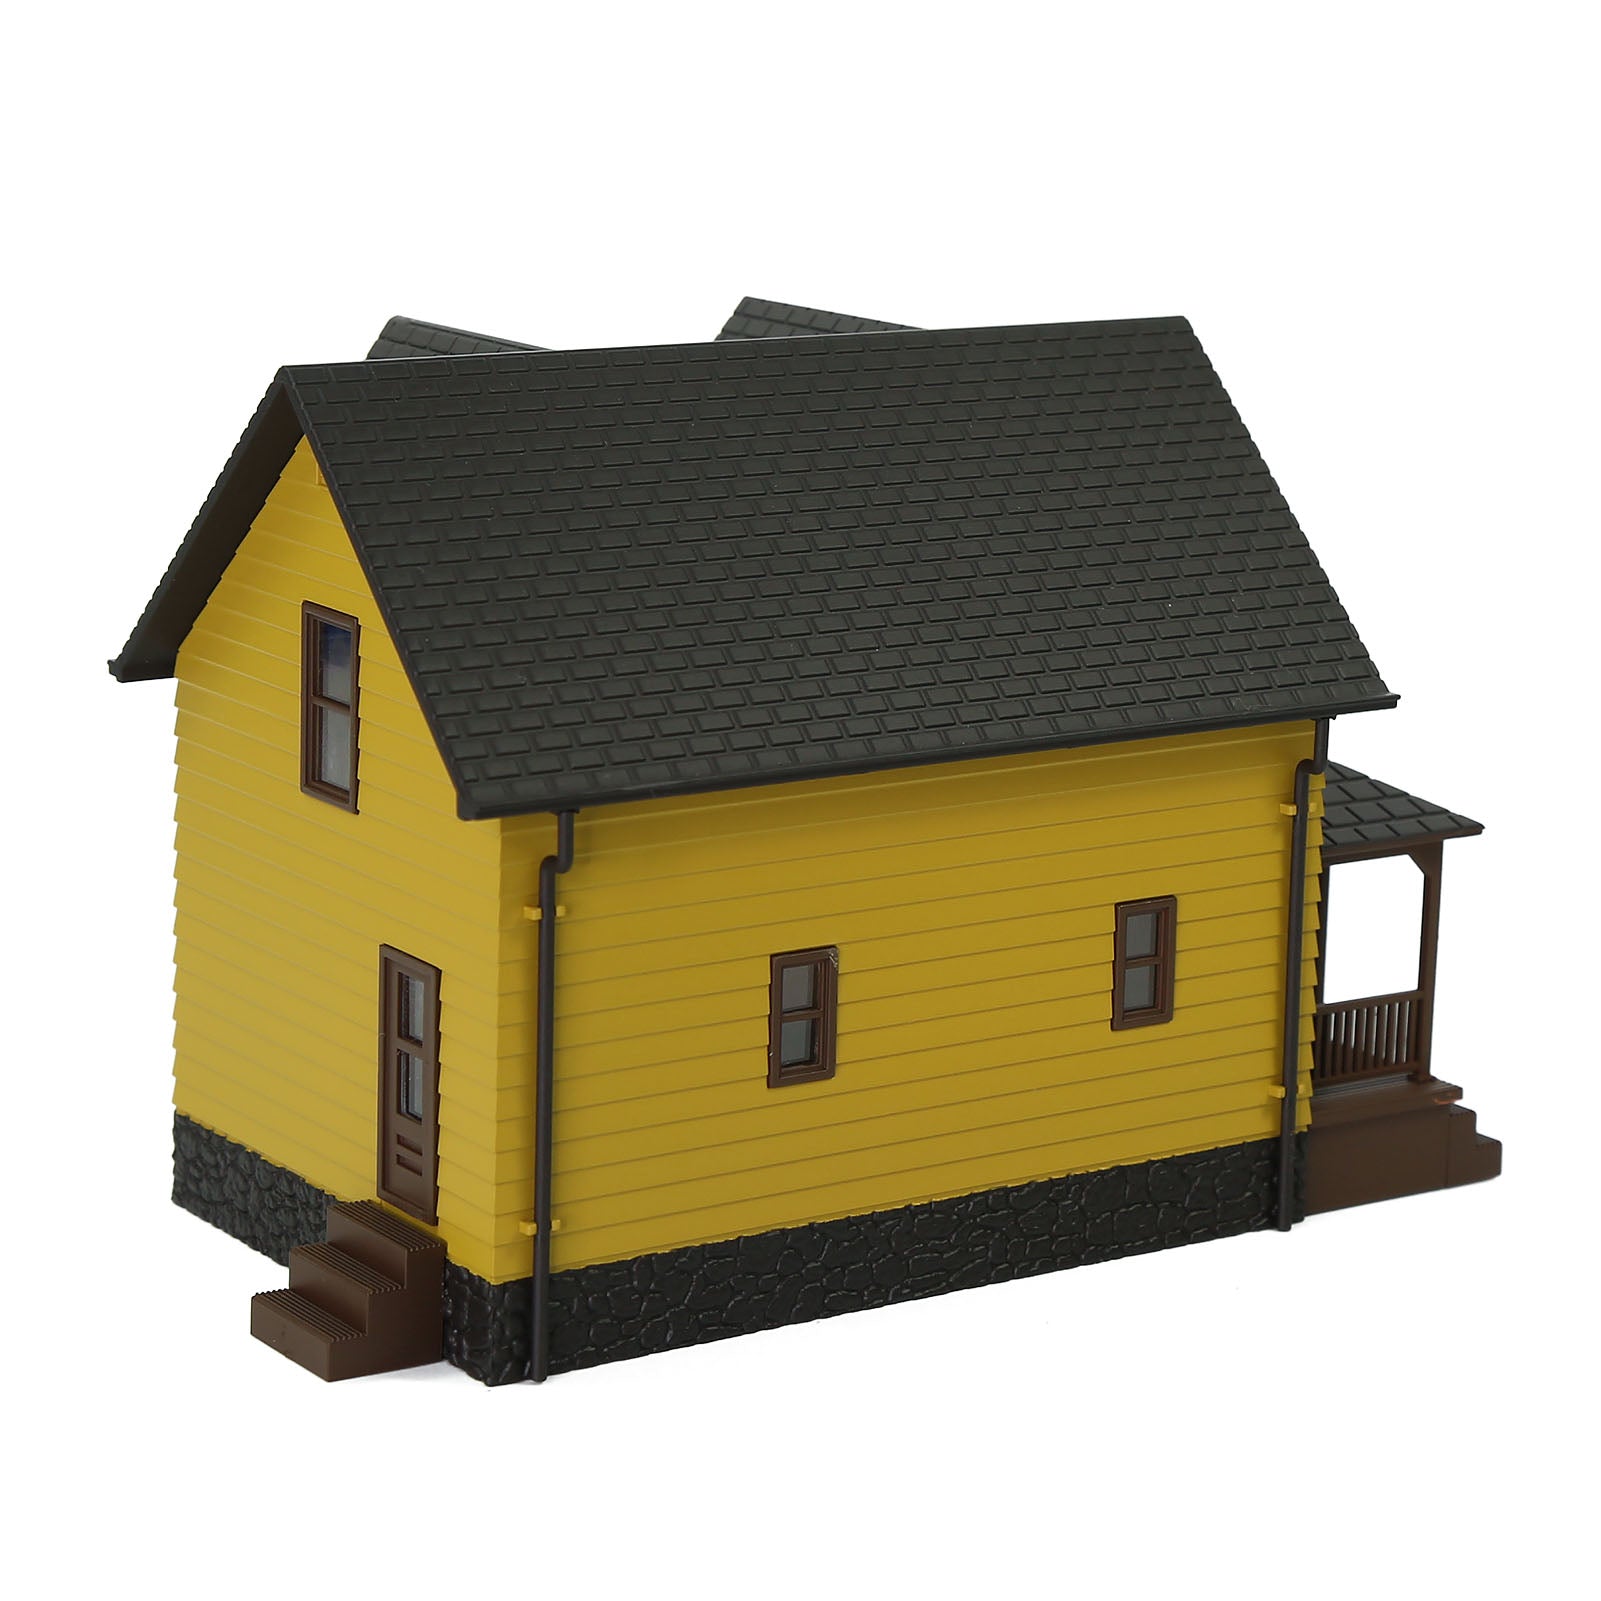 JZO01 1pc O Scale 1:50 Model House Assembled Building Architectural